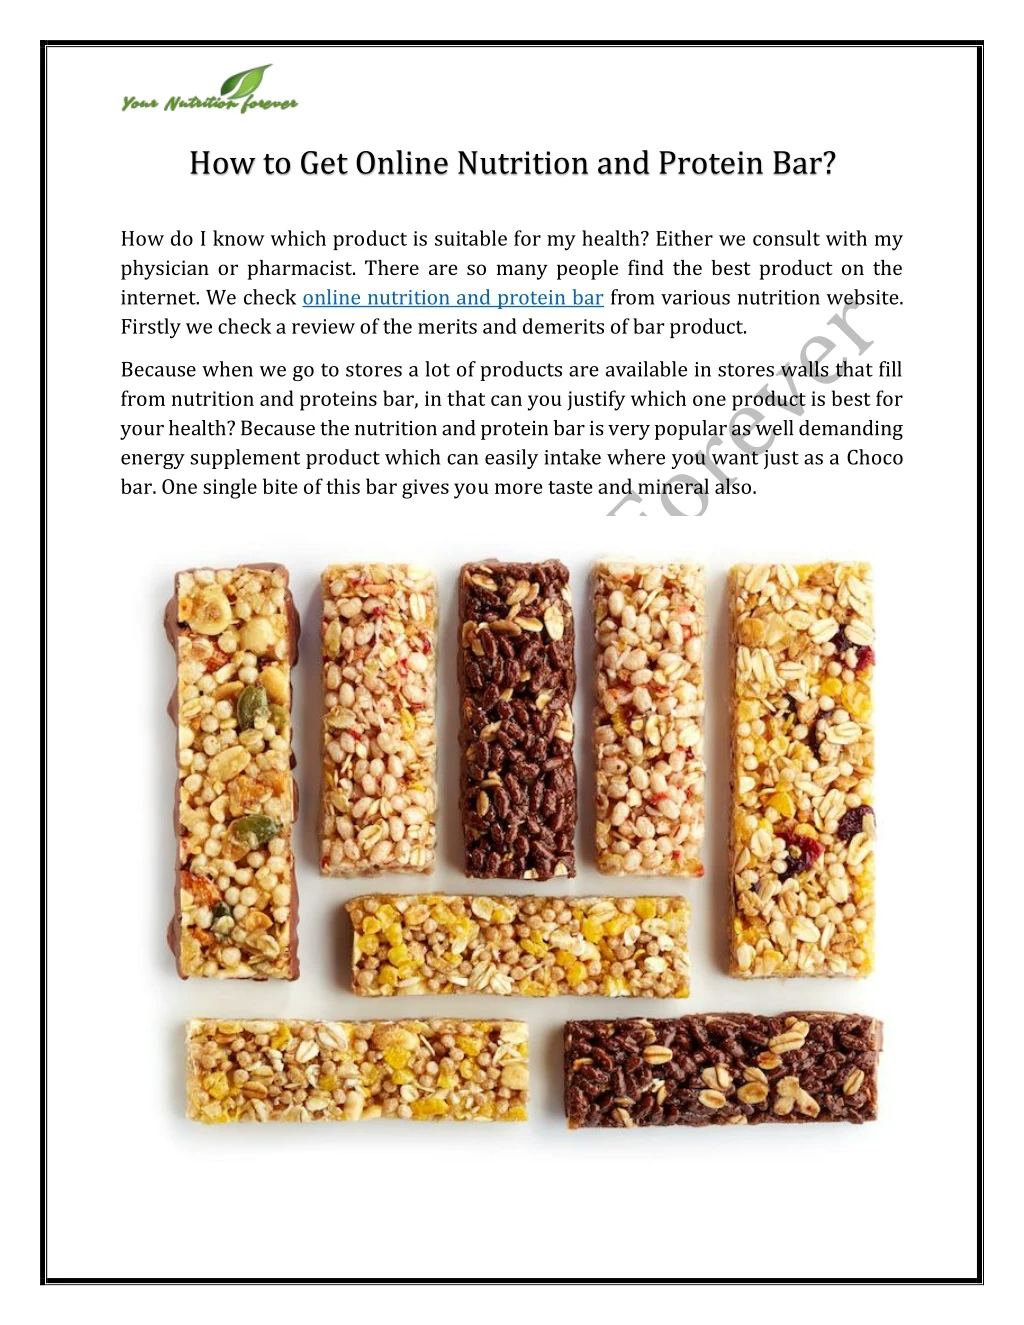 how to get online nutrition and protein bar